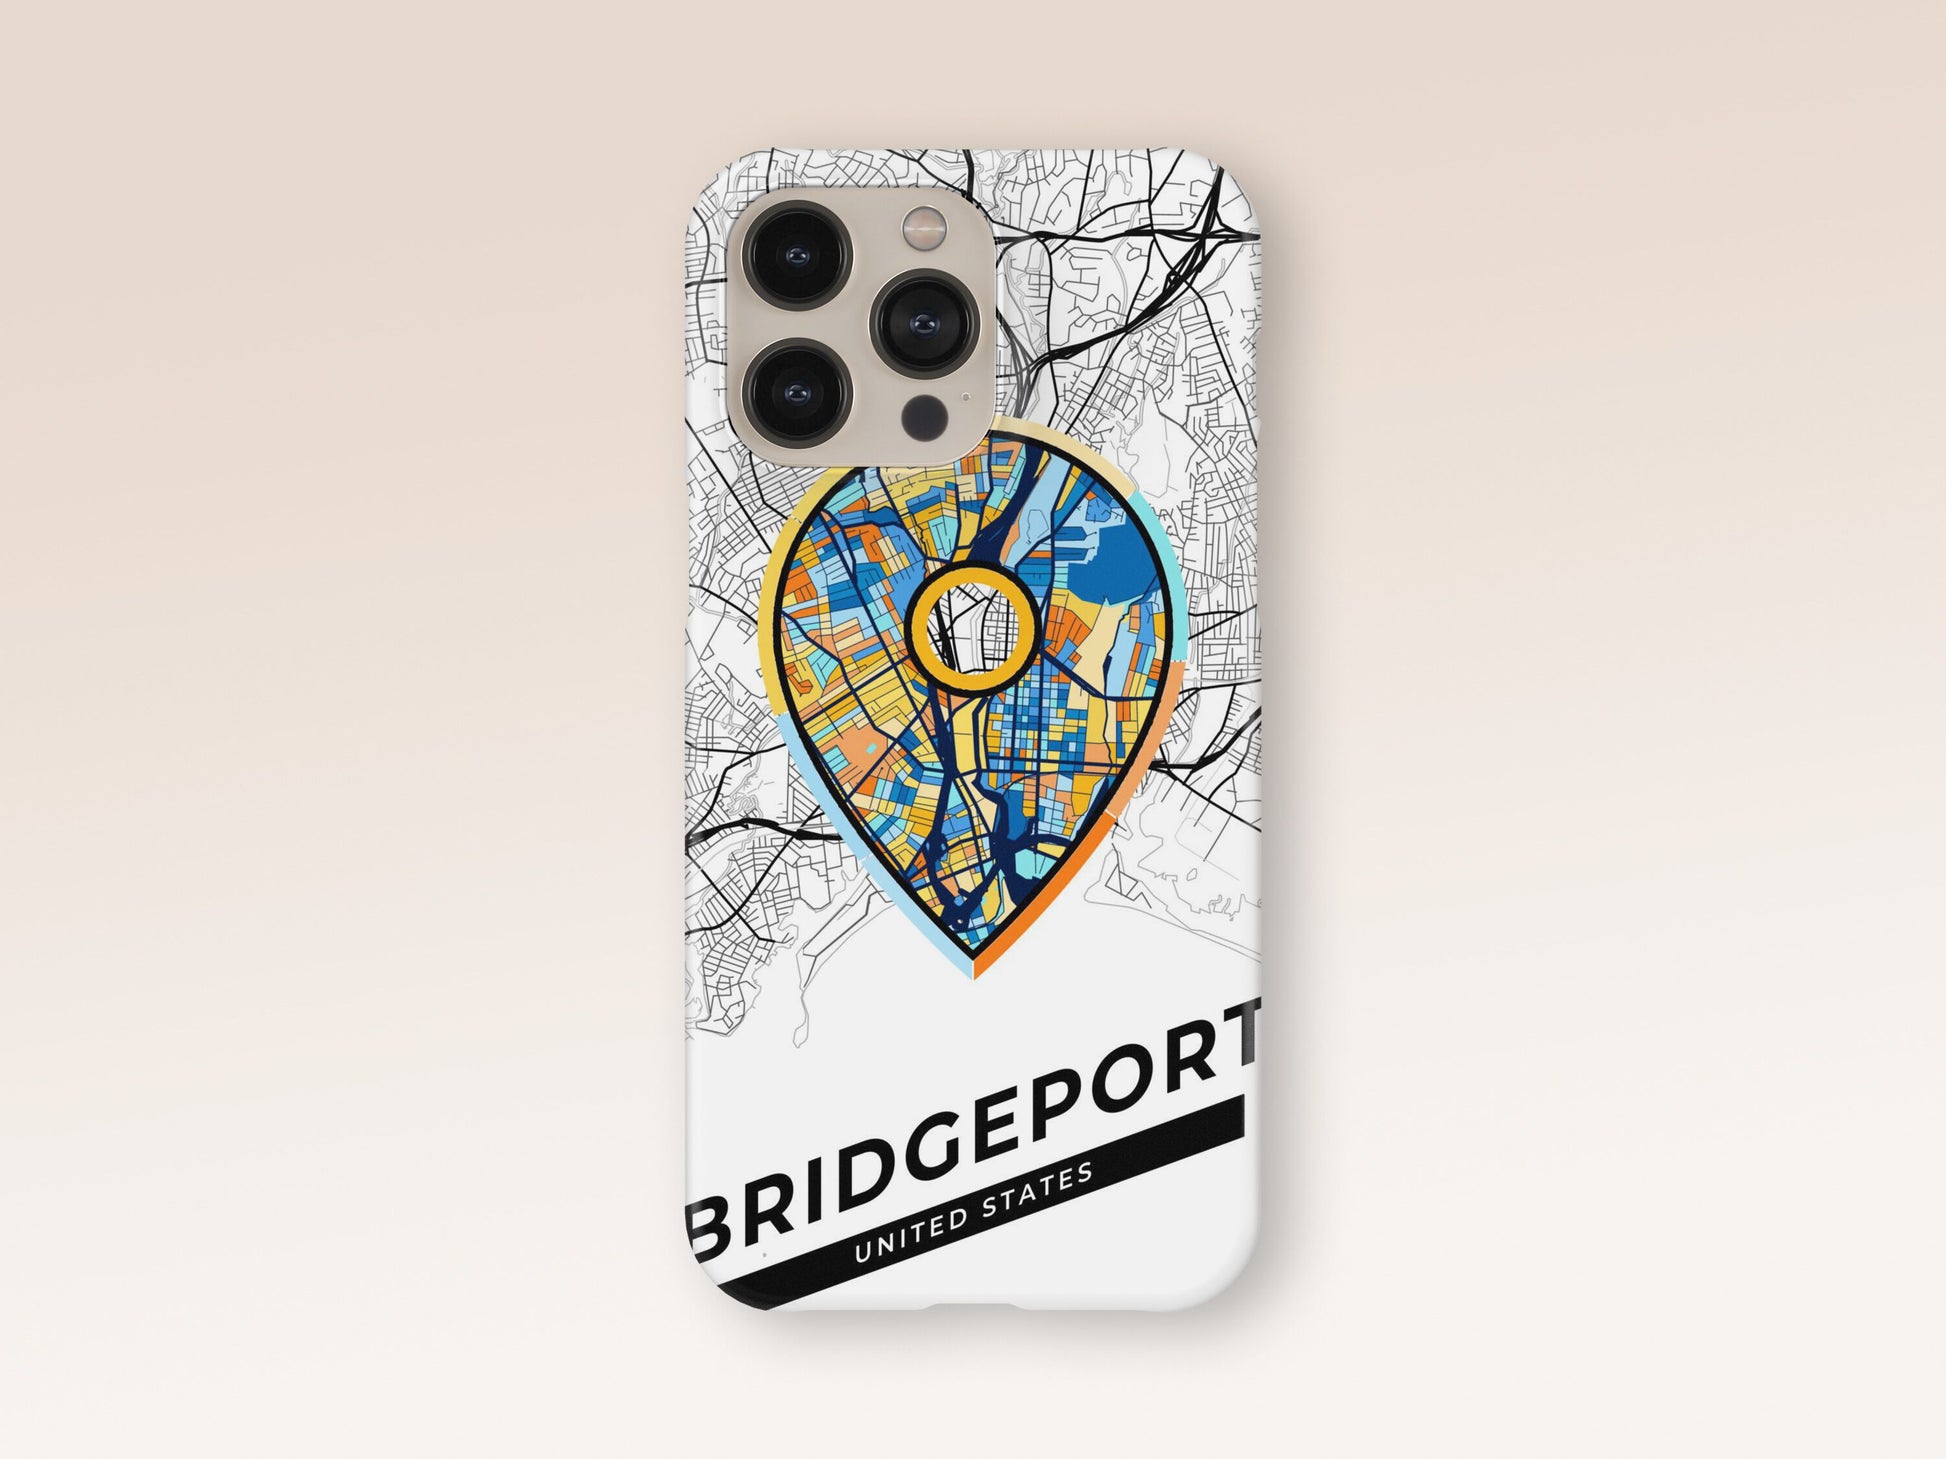 Bridgeport Connecticut slim phone case with colorful icon. Birthday, wedding or housewarming gift. Couple match cases. 1